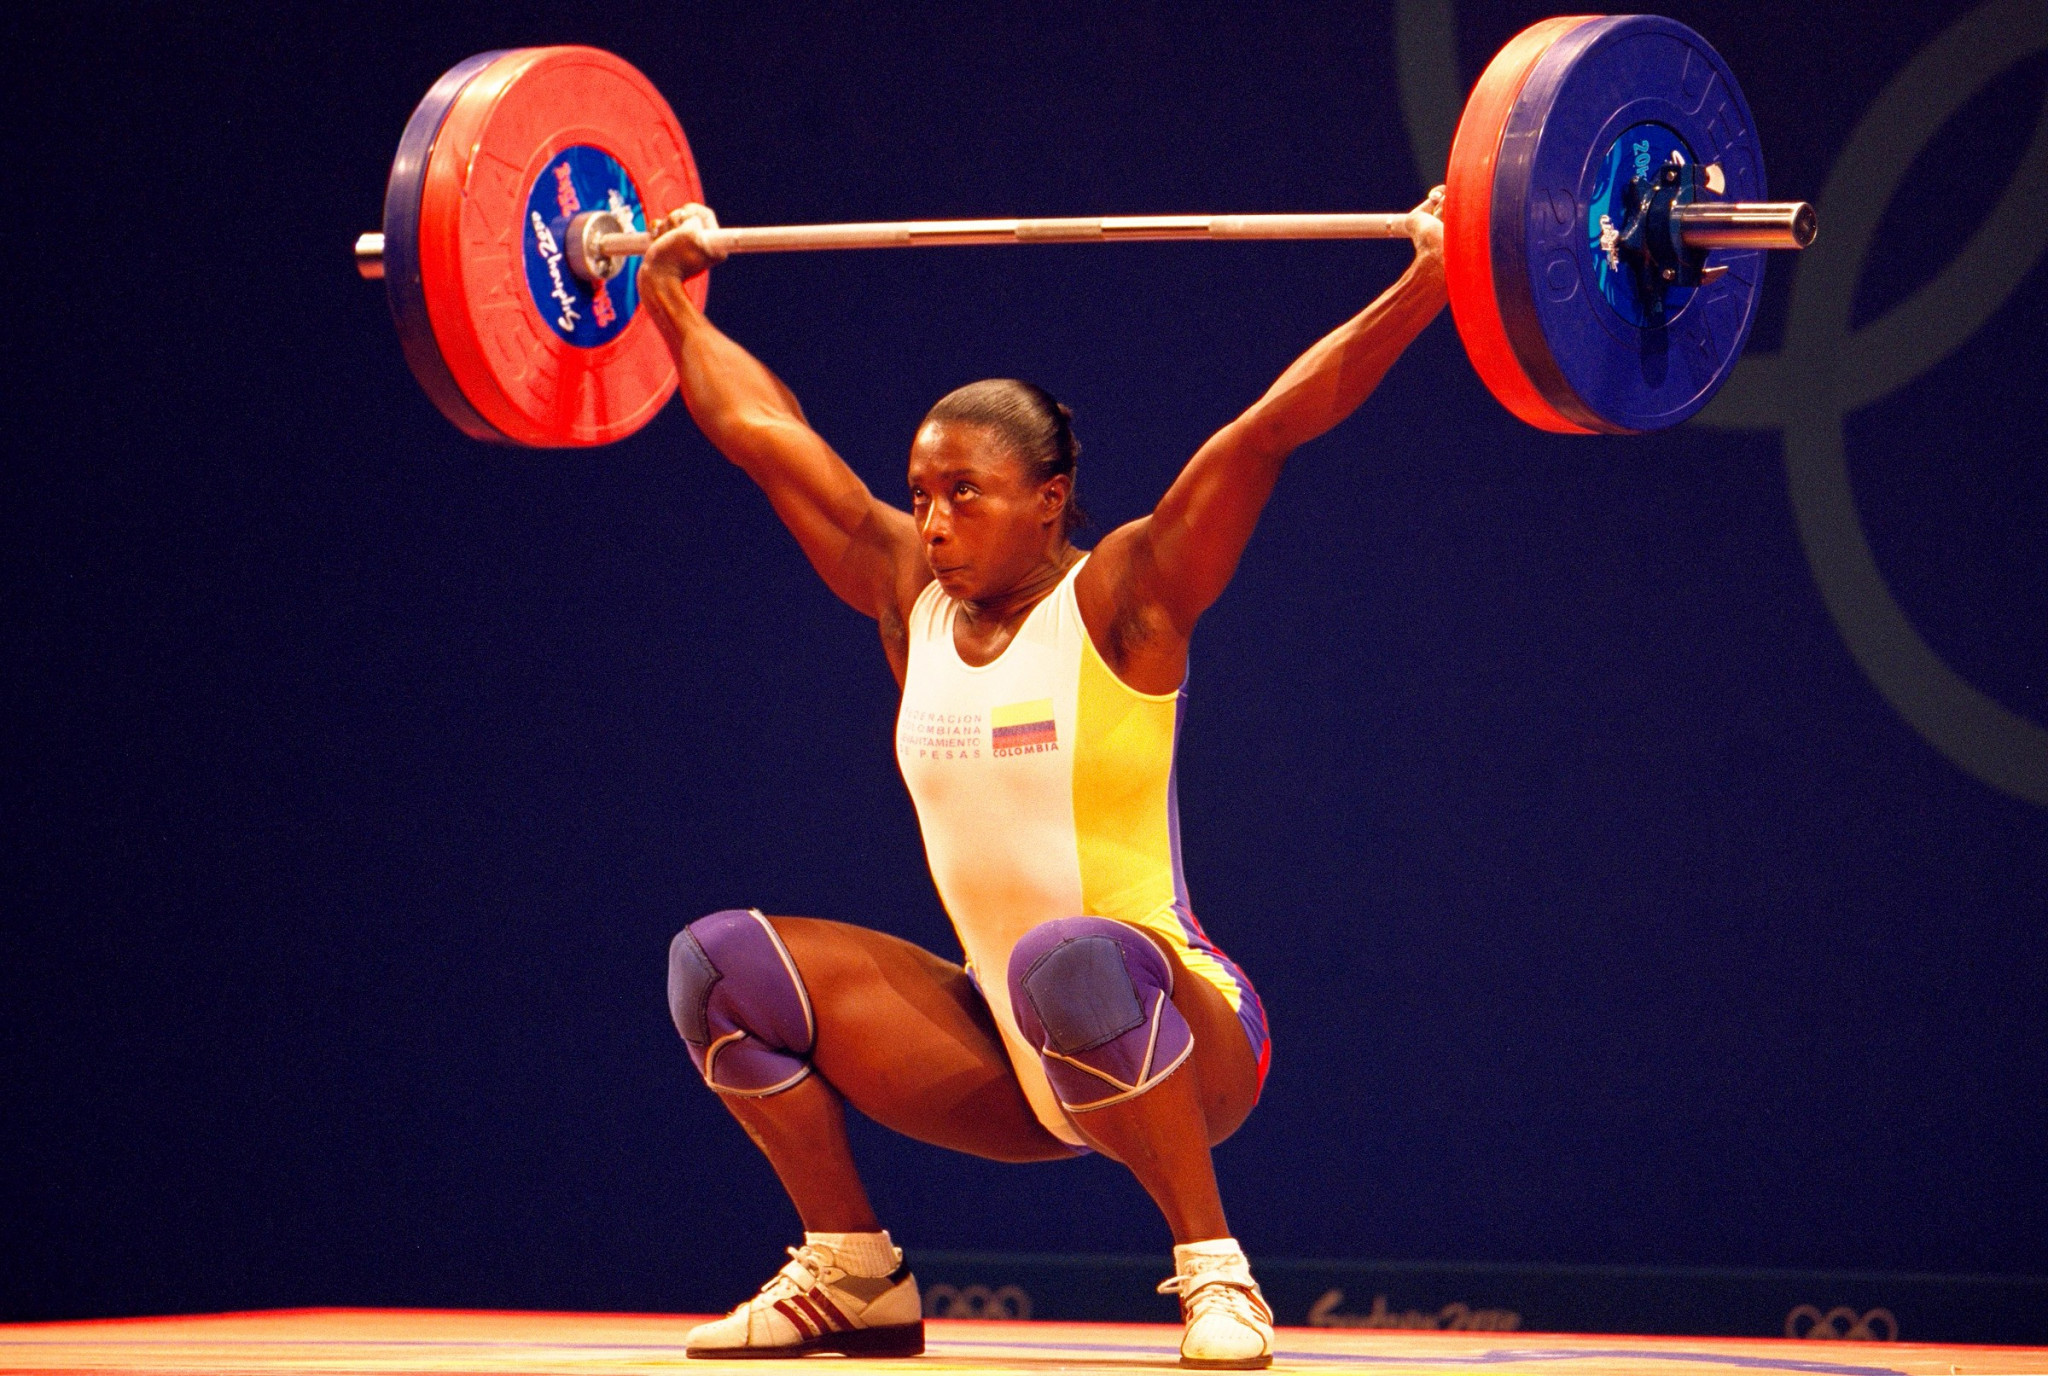 Weightlifter Isabel Maria Urrutia won Colombia's first Olympic gold in any sport when she triumphed at Sydney 2000 ©Getty Images 